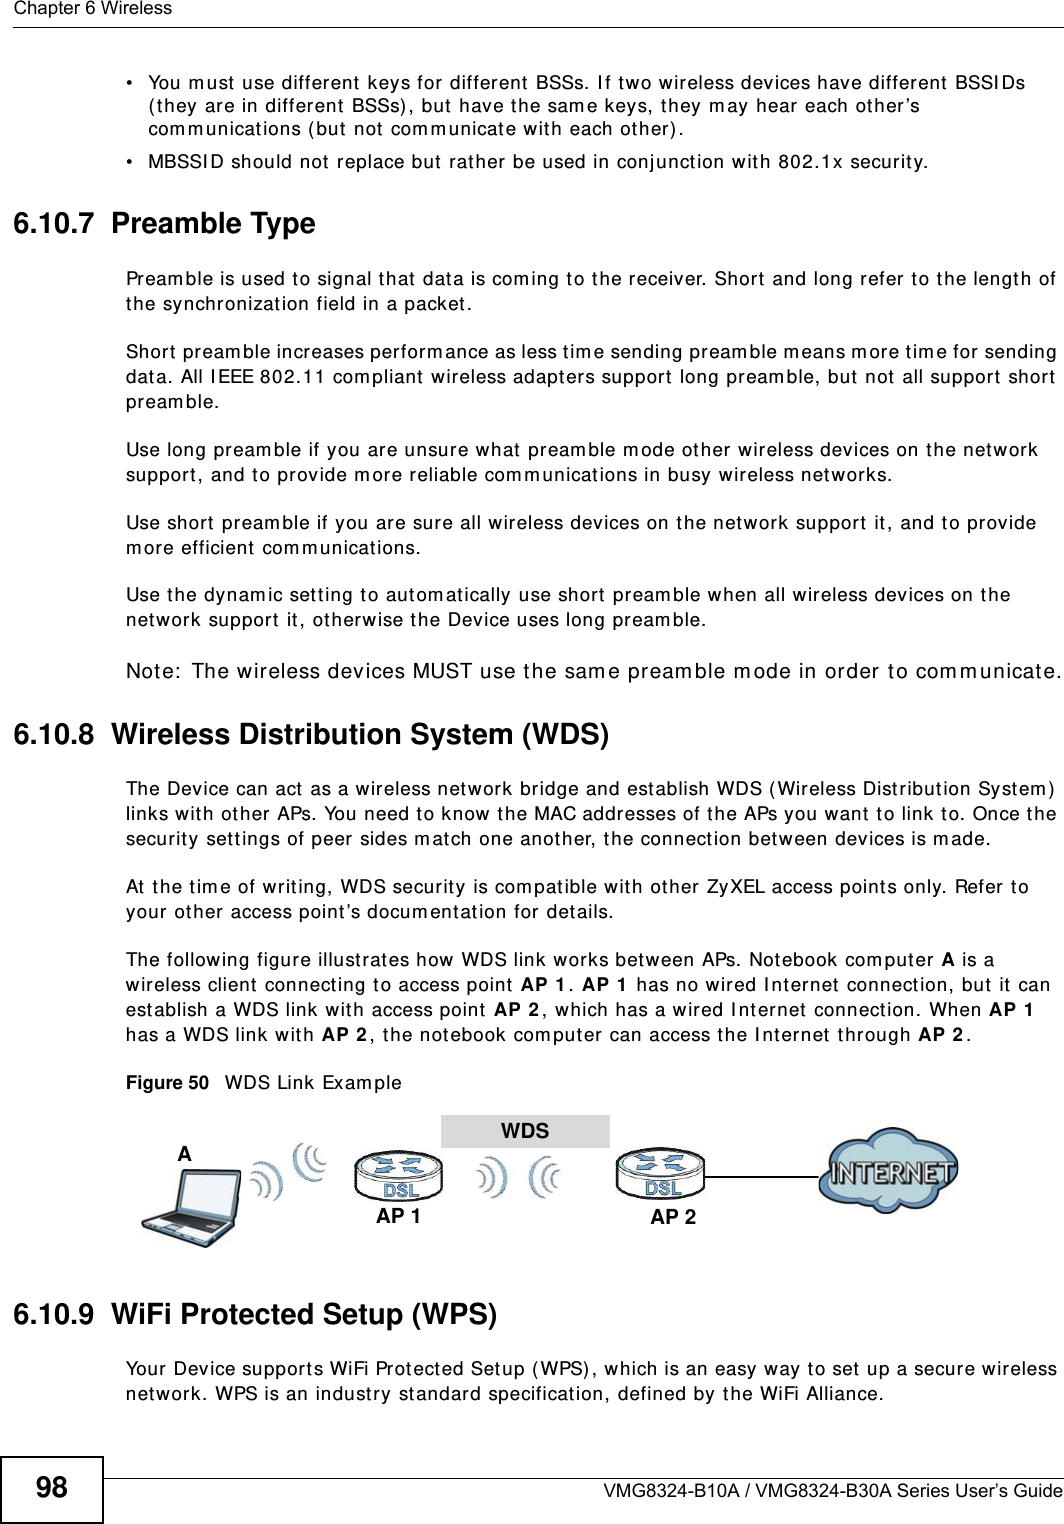 Chapter 6 WirelessVMG8324-B10A / VMG8324-B30A Series User’s Guide98• You m ust  use different  keys for  different  BSSs. I f t wo wireless devices have different  BSSI Ds ( t hey are in different  BSSs), but have t he sam e keys, t hey m ay hear each ot her ’s com m unicat ions ( but not com m unicate with each ot her) .• MBSSI D should not replace but rat her  be used in conj unction w ith 802.1x security.6.10.7  Preamble TypePream ble is used t o signal t hat data is com ing t o t he receiver. Short  and long refer t o the lengt h of the synchronizat ion field in a packet.Short pream ble increases perform ance as less tim e sending pream ble m eans m ore t im e for sending dat a. All I EEE 802.11 com pliant  wireless adapters support  long pream ble, but  not all support  short  pream ble. Use long pream ble if you are unsure what pream ble m ode other  wireless devices on t he net work support, and t o provide m ore reliable com m unicat ions in busy wireless net works. Use short  pream ble if you are sure all wireless devices on t he net work support  it , and to provide m ore efficient  com m unicat ions.Use t he dynam ic set t ing to aut om at ically use shor t  pream ble when all wireless devices on t he net work support  it , ot herwise t he Device uses long pream ble.Note:  The w ireless devices MUST use the sam e pream ble m ode in order t o com m unicate.6.10.8  Wireless Distribution System (WDS)The Device can act as a wireless net work bridge and est ablish WDS ( Wireless Dist ribut ion Syst em )  links w ith other APs. You need to know the MAC addresses of the APs you want  to link t o. Once t he security set t ings of peer sides m at ch one another, t he connect ion bet ween devices is m ade.At  t he t im e of writ ing, WDS security is com pat ible with other ZyXEL access point s only. Refer to your ot her access point ’s docum ent at ion for details.The following figure illust rat es how WDS link works bet w een APs. Not ebook com put er A is a wireless client  connecting to access point  AP 1 . AP 1  has no wired I nternet connect ion, but  it  can establish a WDS link with access point AP 2 , which has a w ired I nt ernet  connect ion. When AP 1  has a WDS link wit h AP 2 , t he not ebook com puter can access the I nt ernet  t hrough AP 2 .Figure 50   WDS Link Exam ple6.10.9  WiFi Protected Setup (WPS)Your Device support s WiFi Prot ected Set up ( WPS) , w hich is an easy way t o set up a secure wireless net work. WPS is an indust ry st andard specification, defined by the WiFi Alliance.WDSAP 2AP 1A